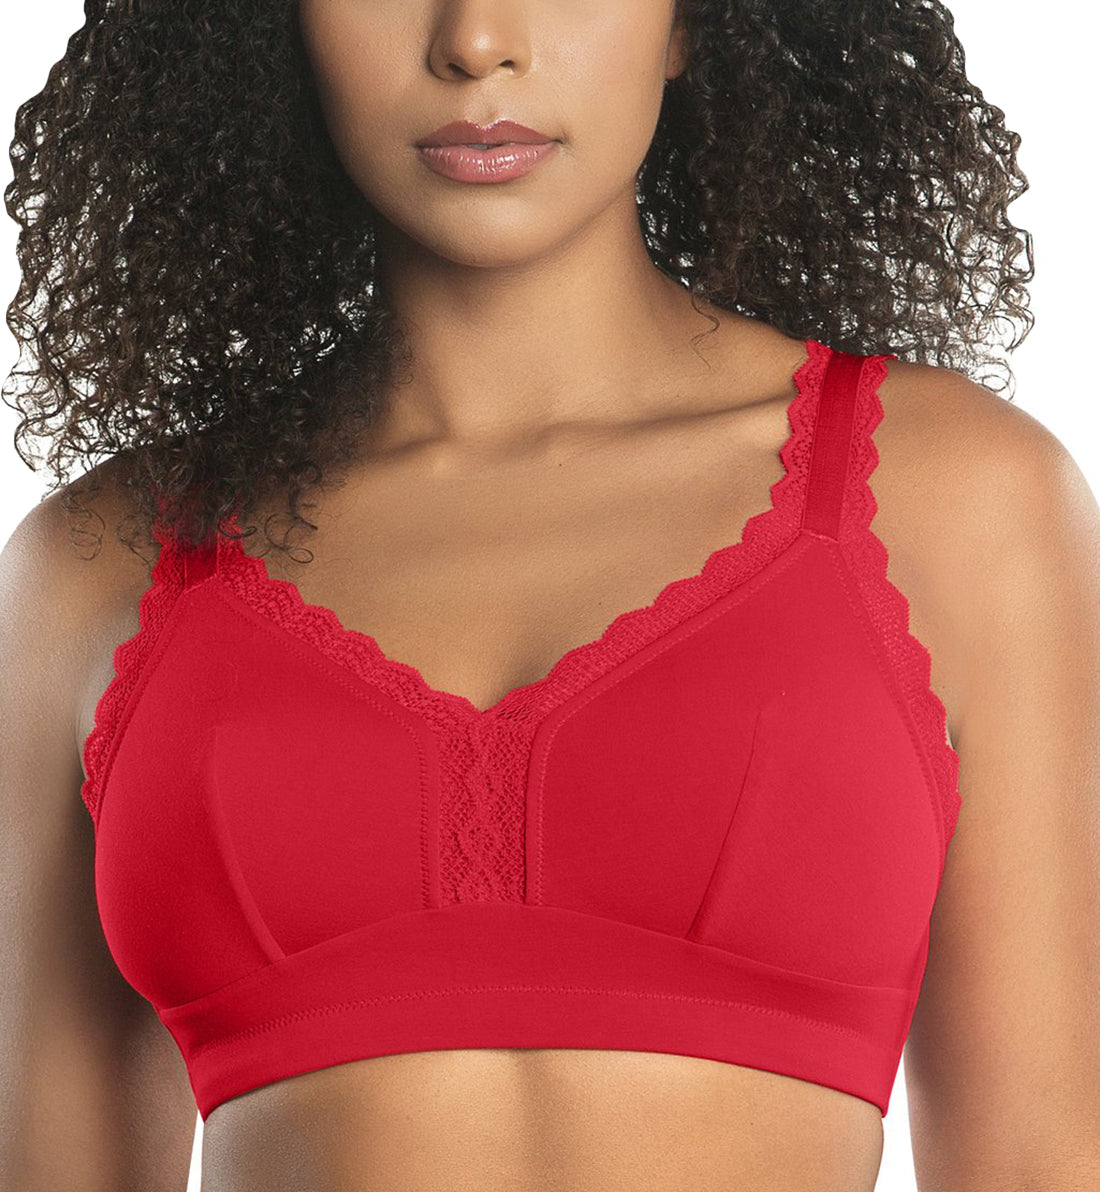 Parfait Dalis Soft Modal Bralette with J-Hook (5641),30D,Racing Red - Racing Red,30D